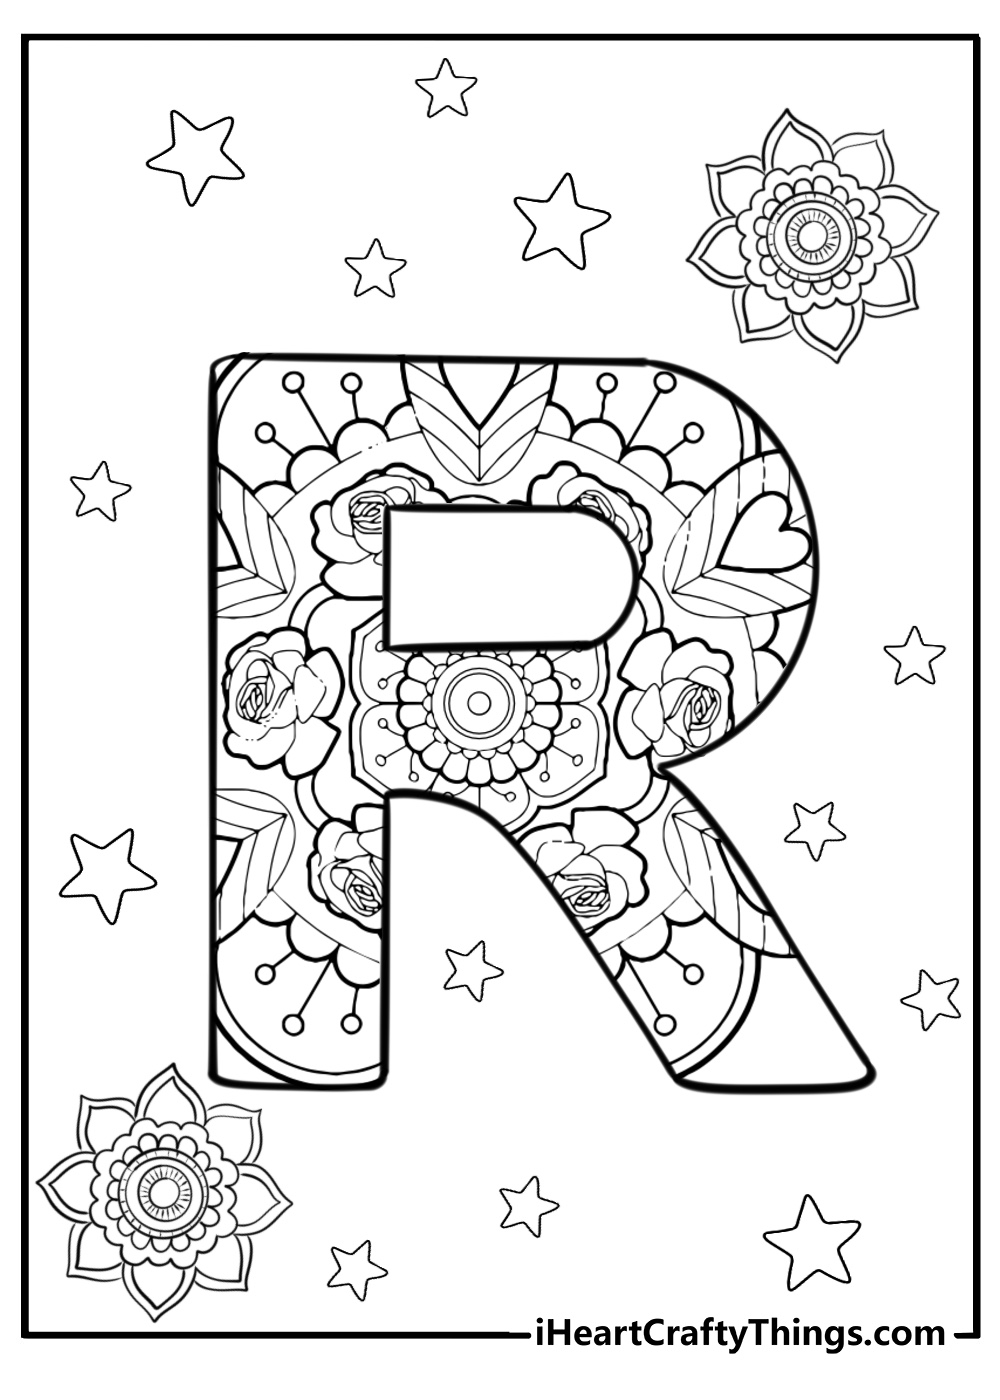 Complex letter r coloring page